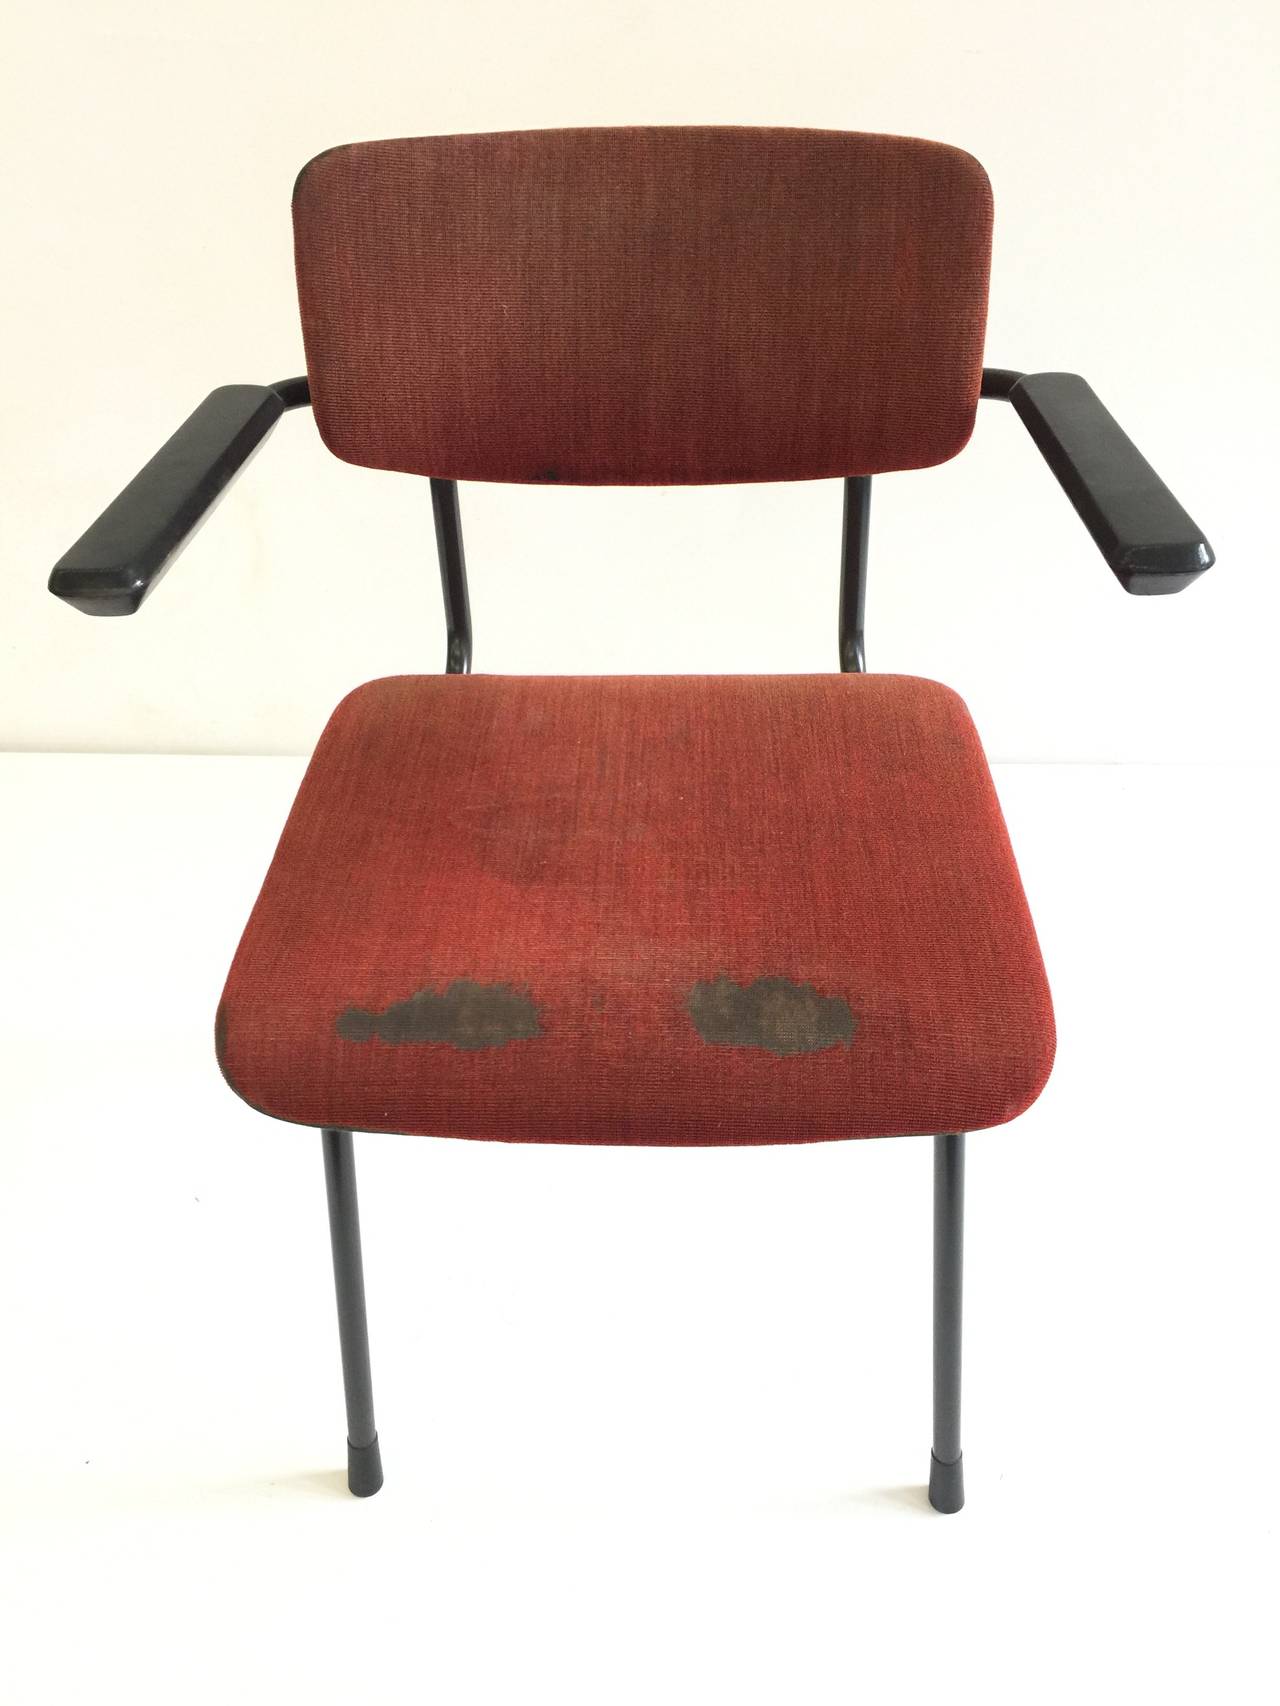 Mid-Century Modern Big Lot Gispen 1236 Armchairs Produced in 1960 for a Dutch University